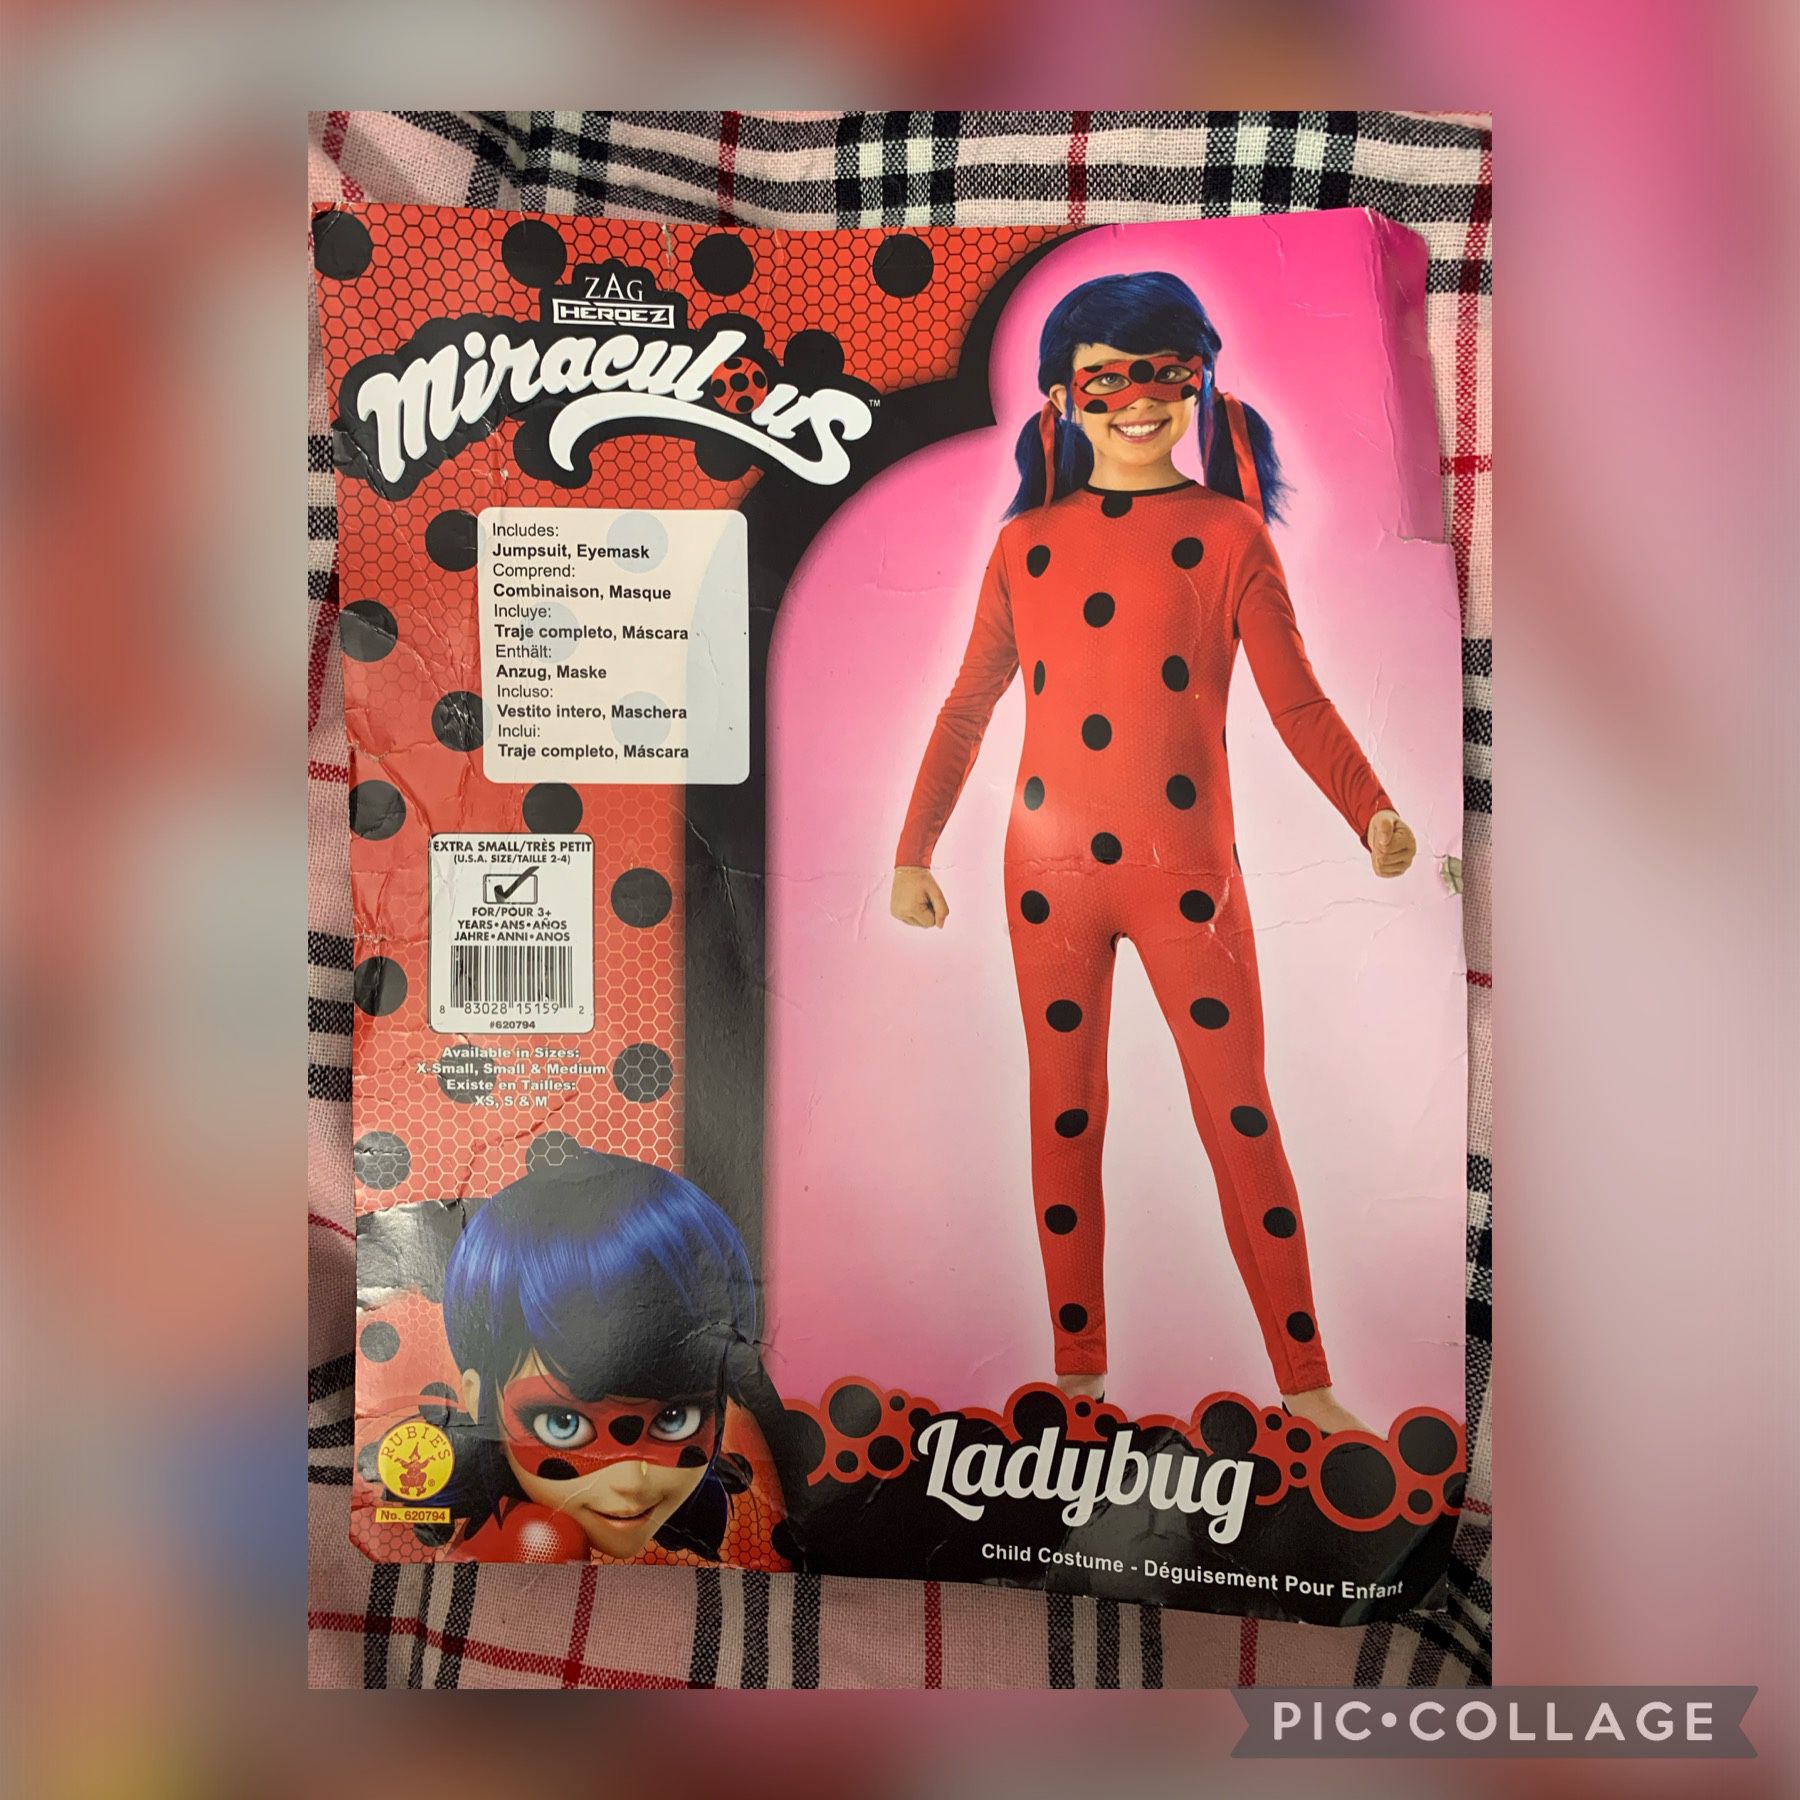 very beautiful ladybug costume for girls includes full suit and eye mask